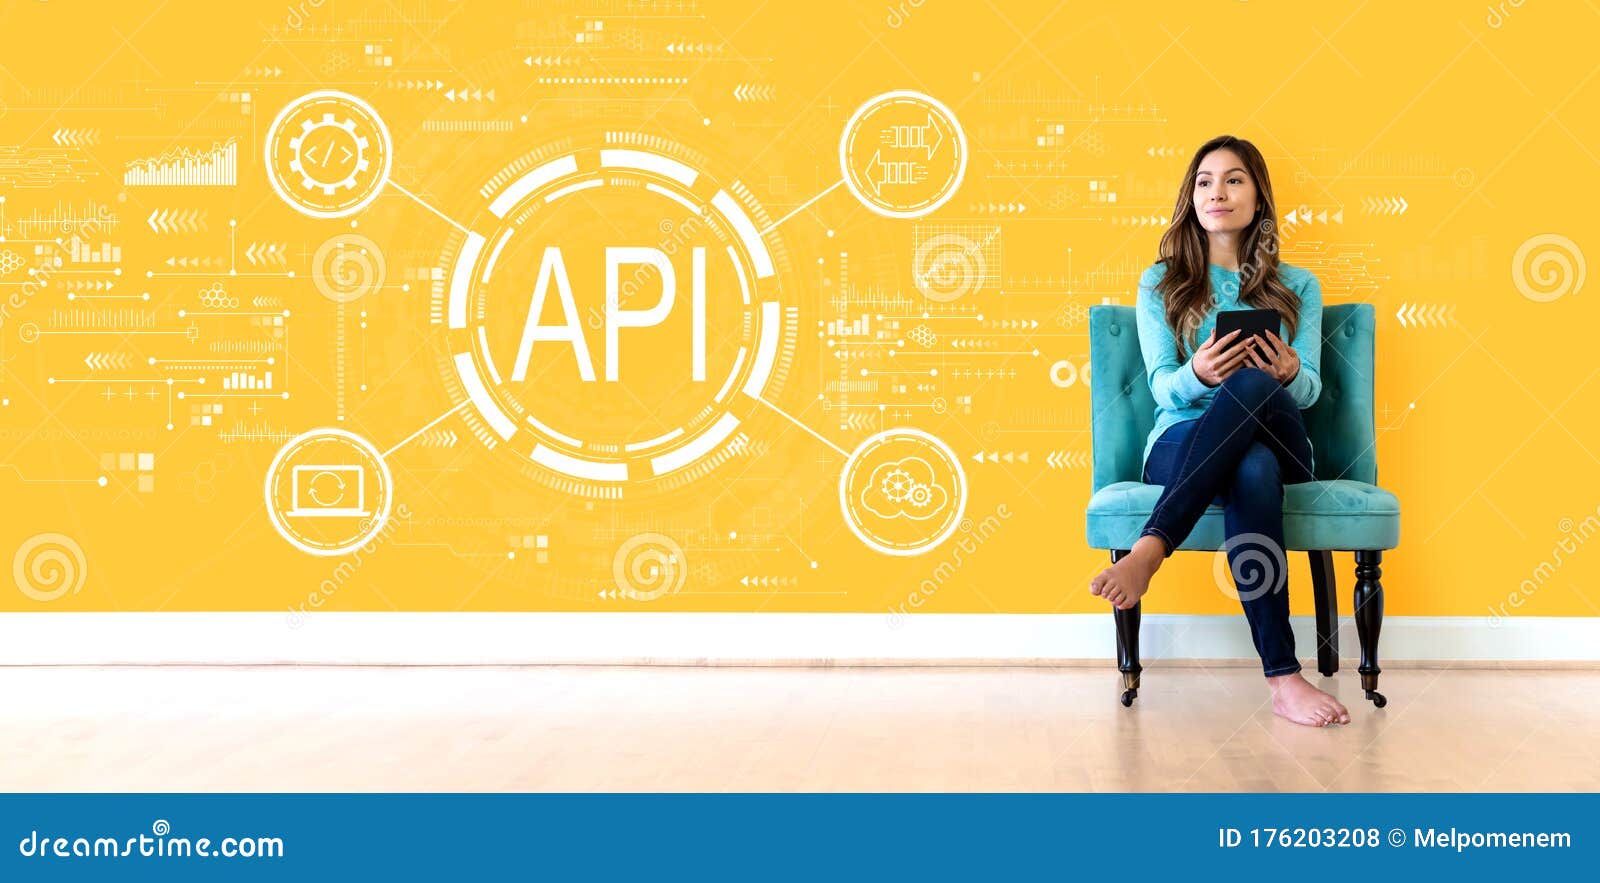 api - application programming interface concept api concept with young woman